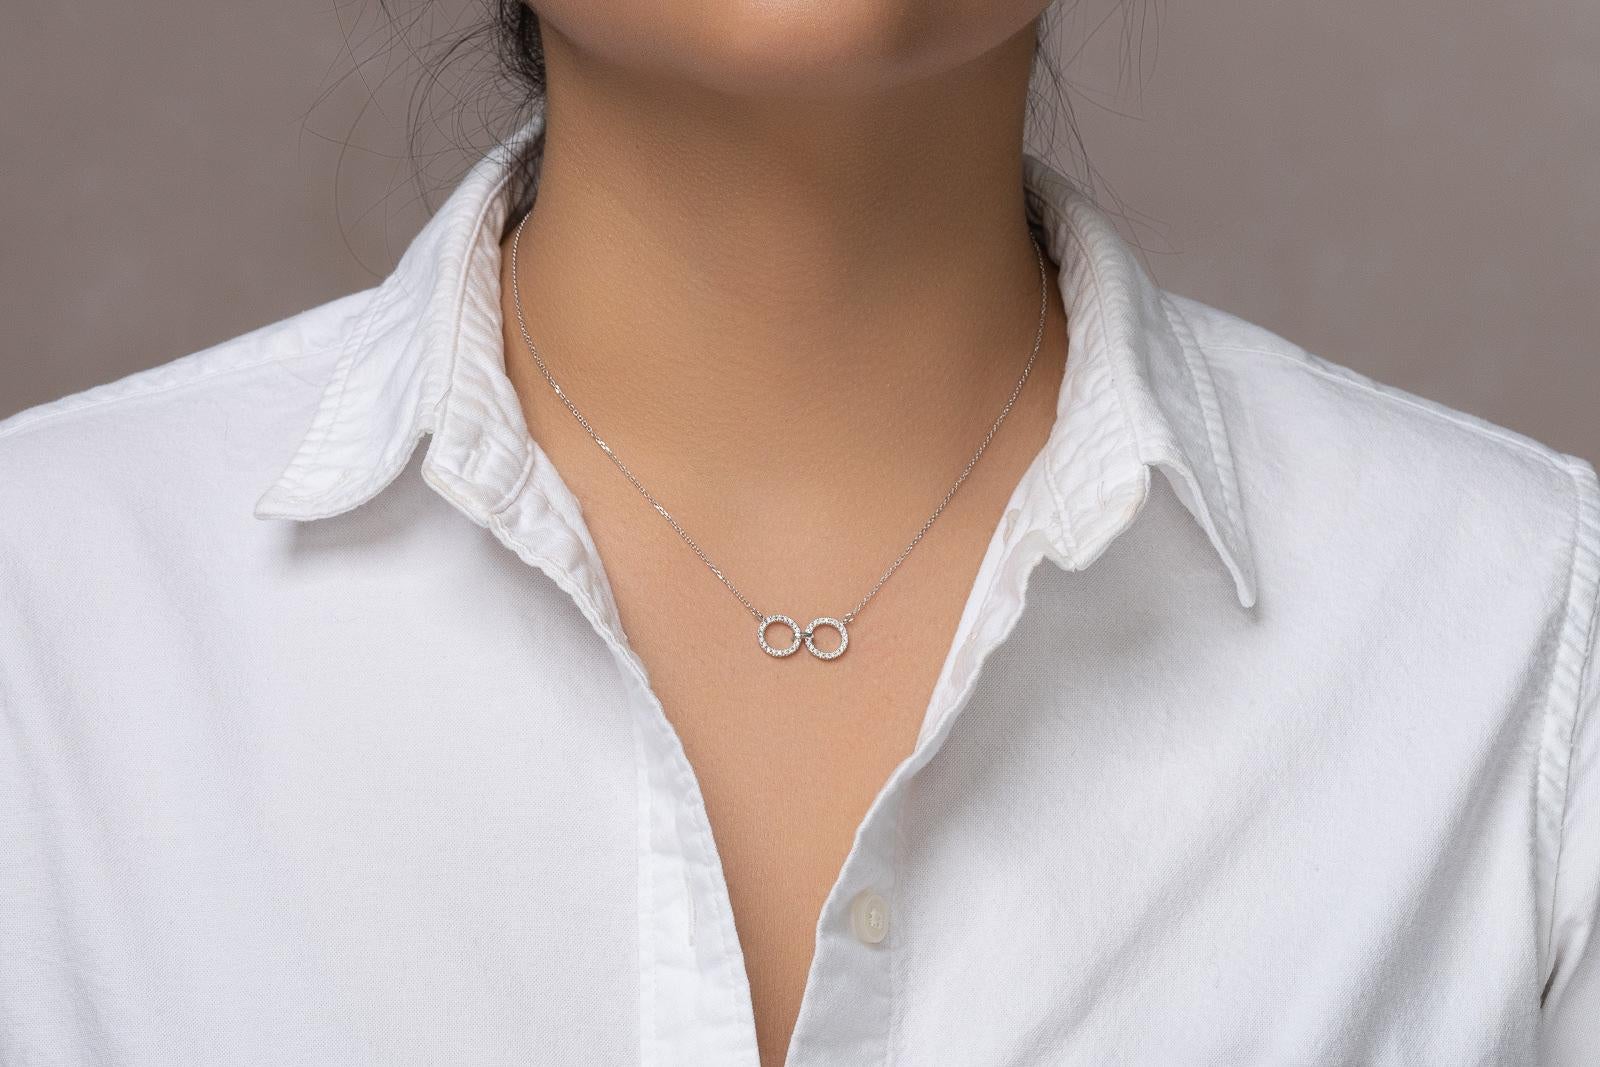 This geo art necklace is subtle but striking. A beautiful diamond necklace that catches attention without overpowering. The essence of elegant every day fine jewelry. The diamond necklace in 14k white gold is perfect to gift someone you share a